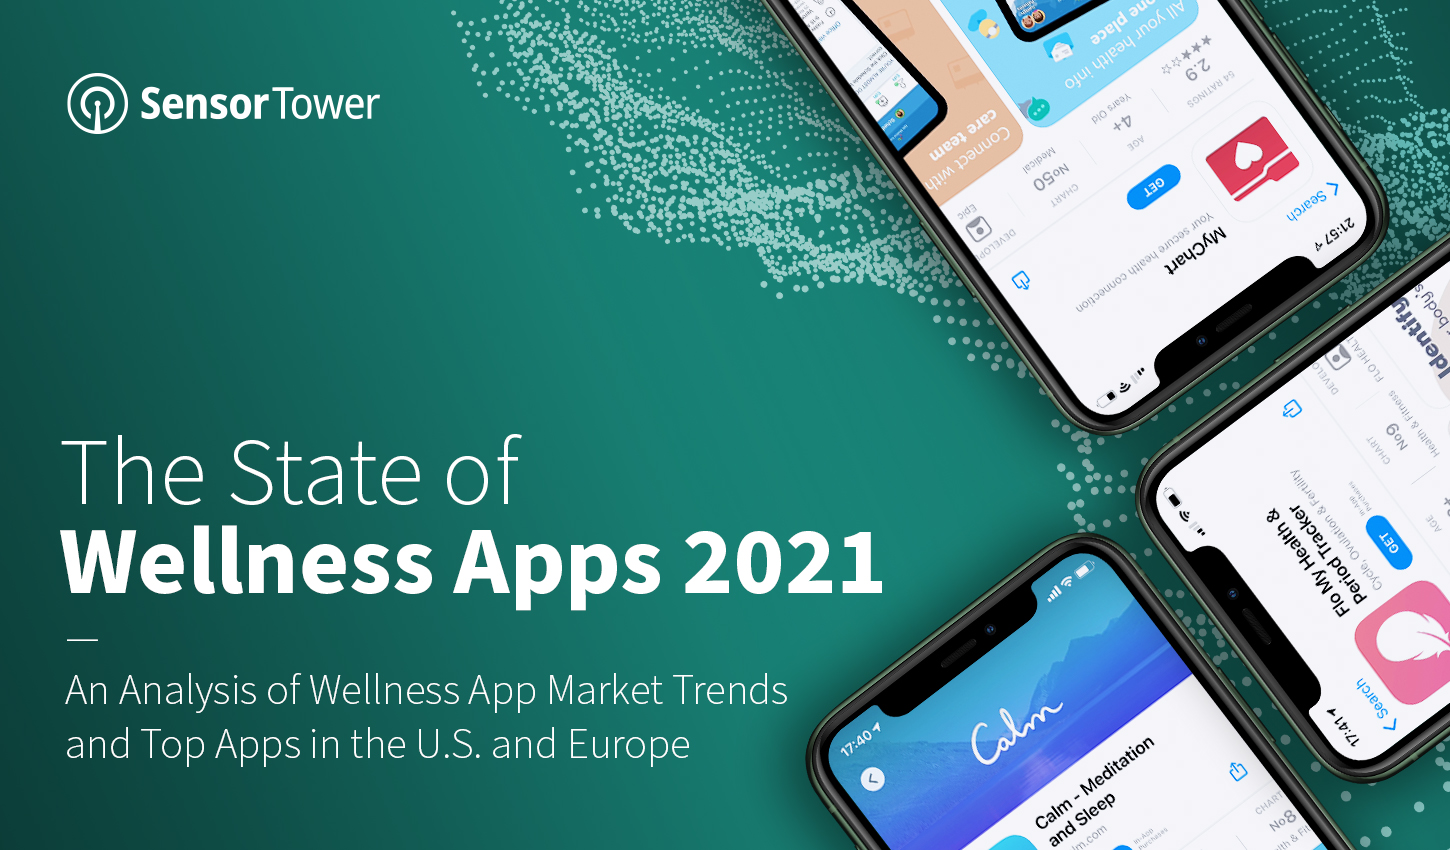 Three takeaways from Sensor Tower's 2021 State of Wellness Apps report.